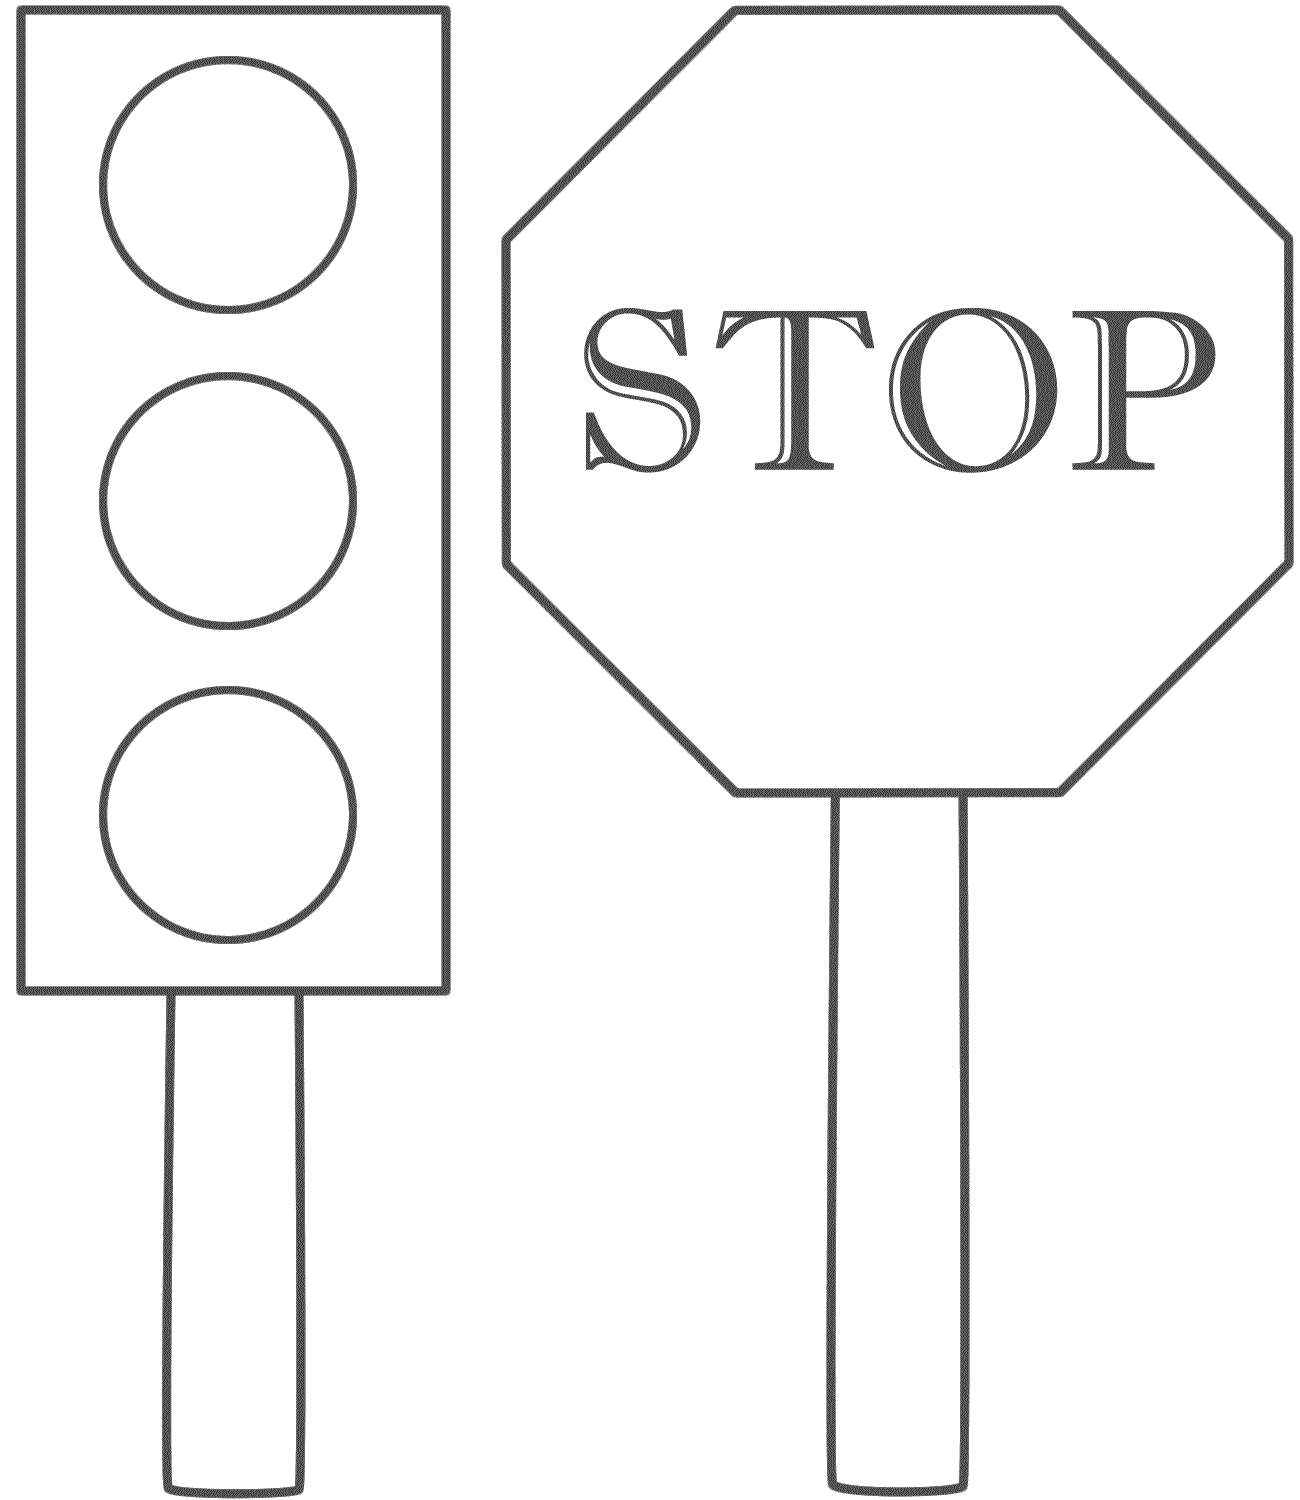 65 Simple Stop Sign Coloring Page 